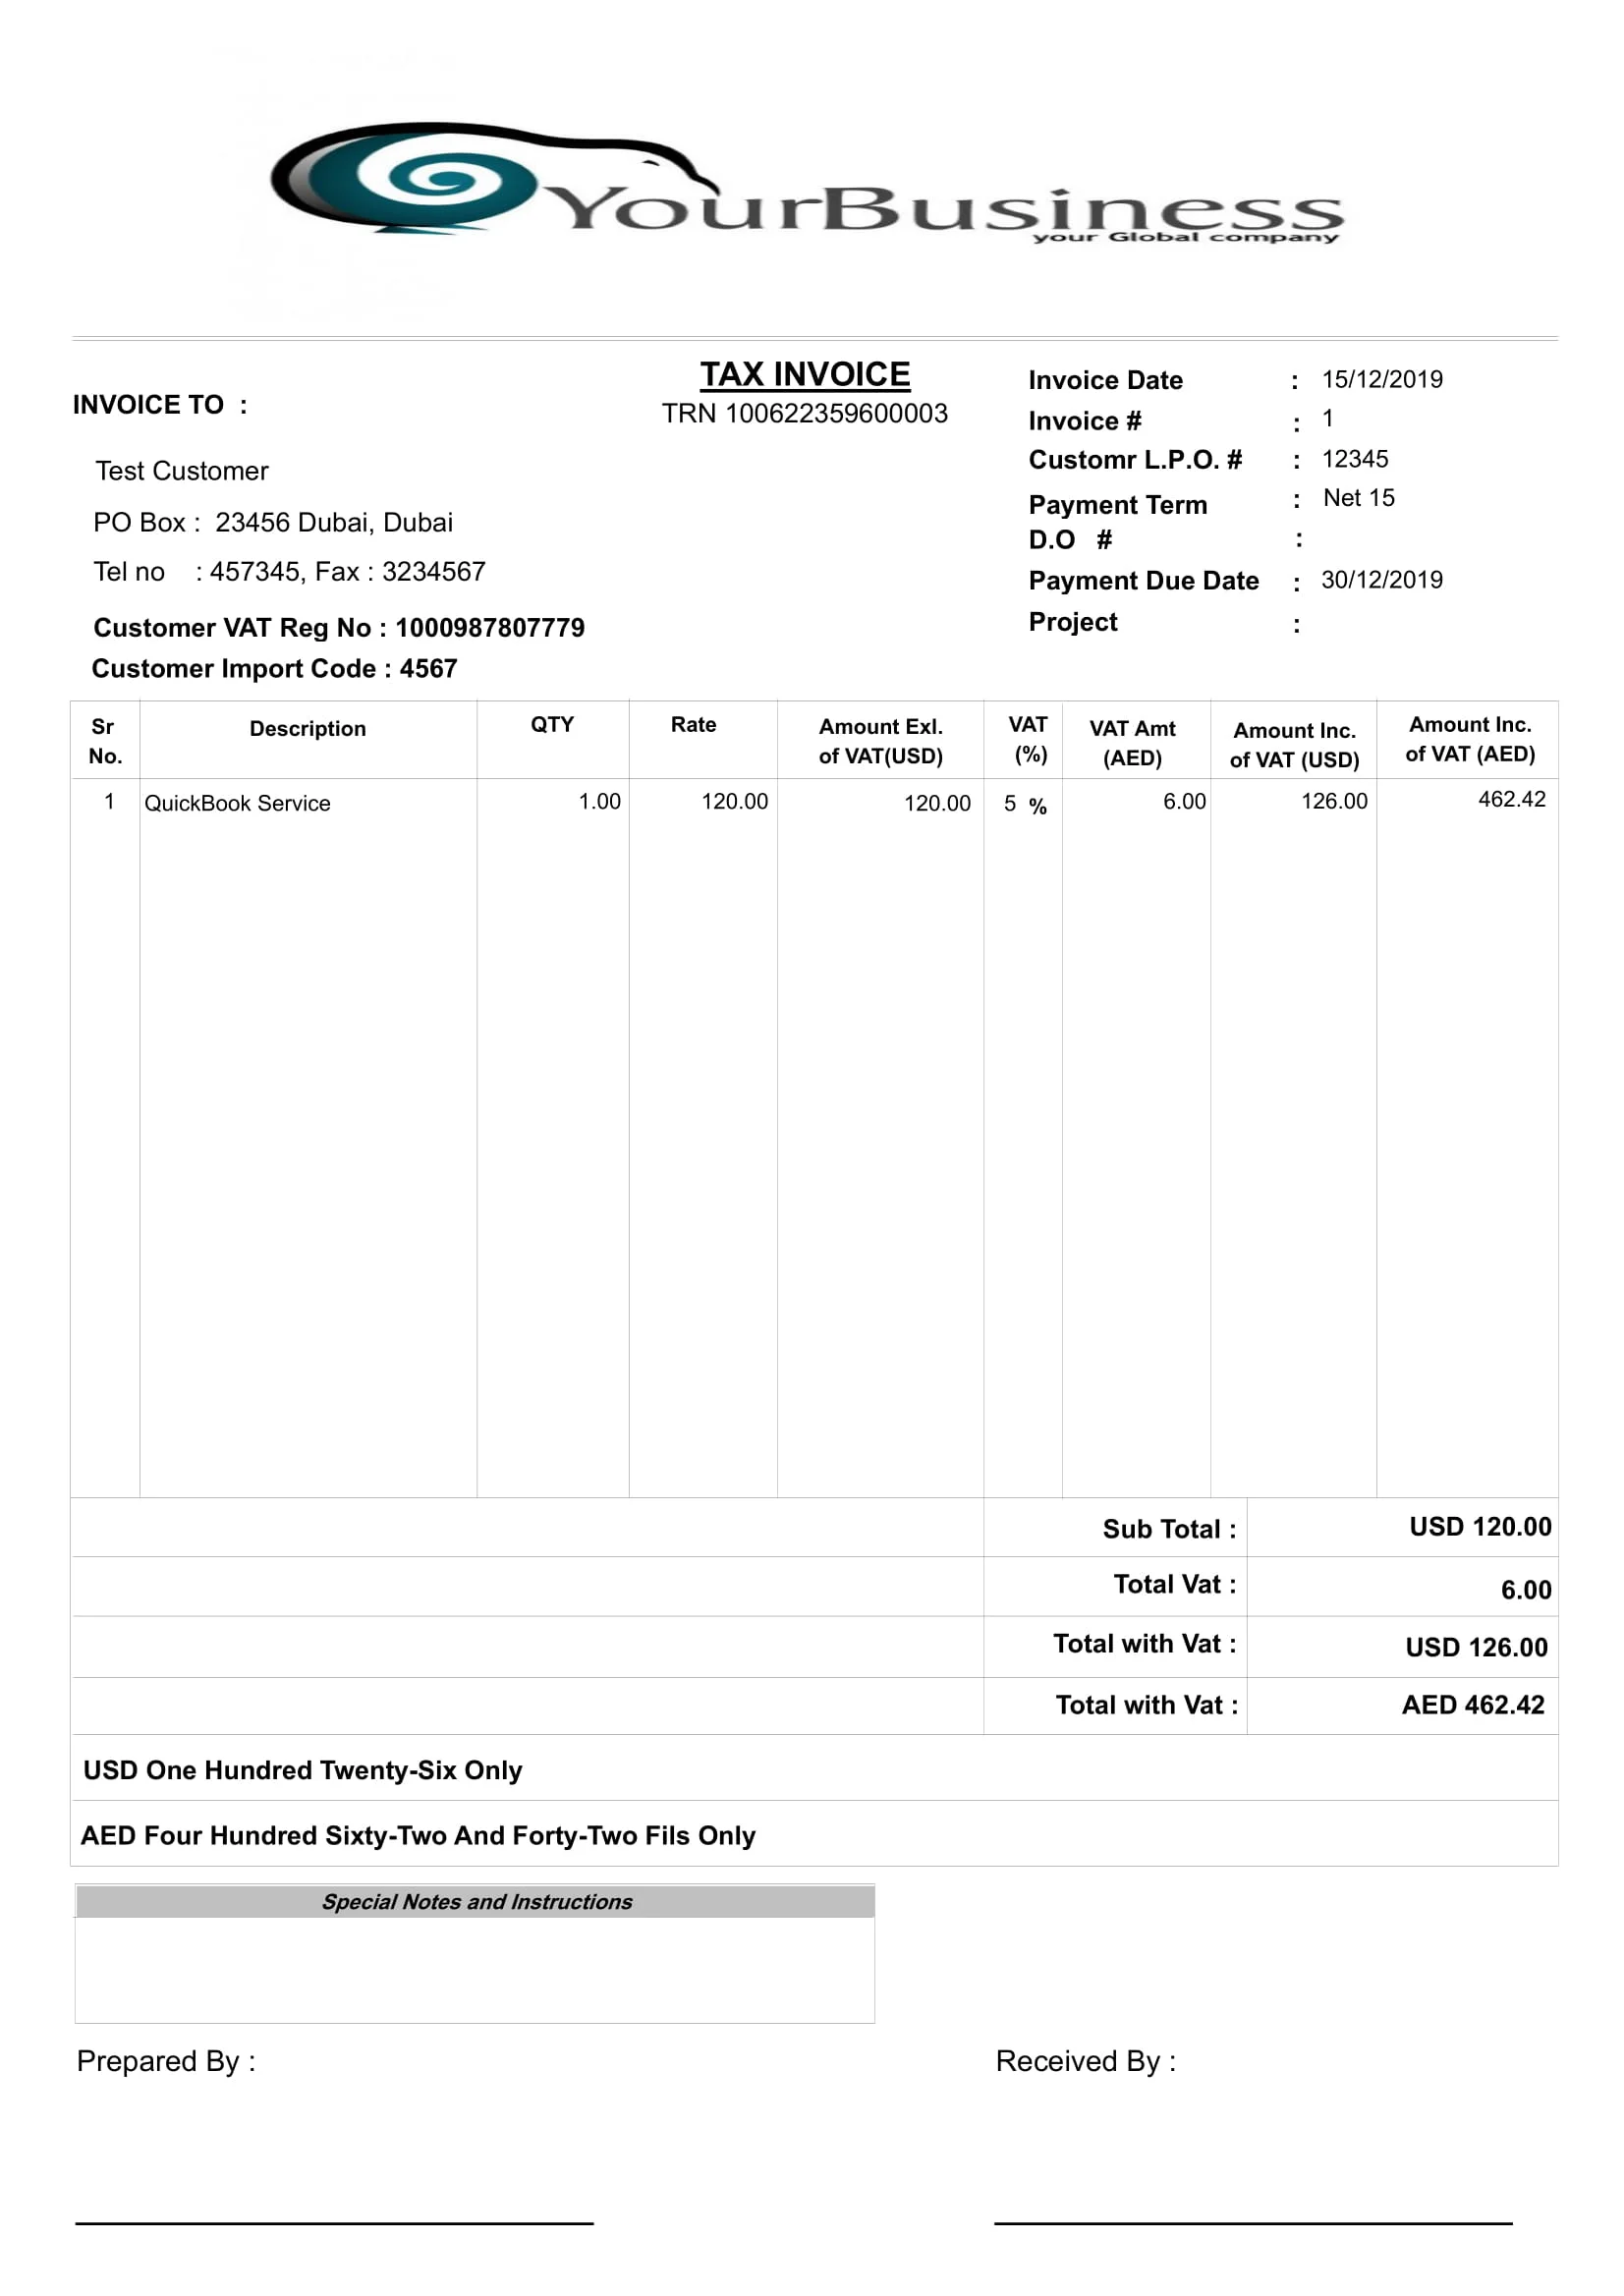 Sales Invoice With Multicurrency - penieltech